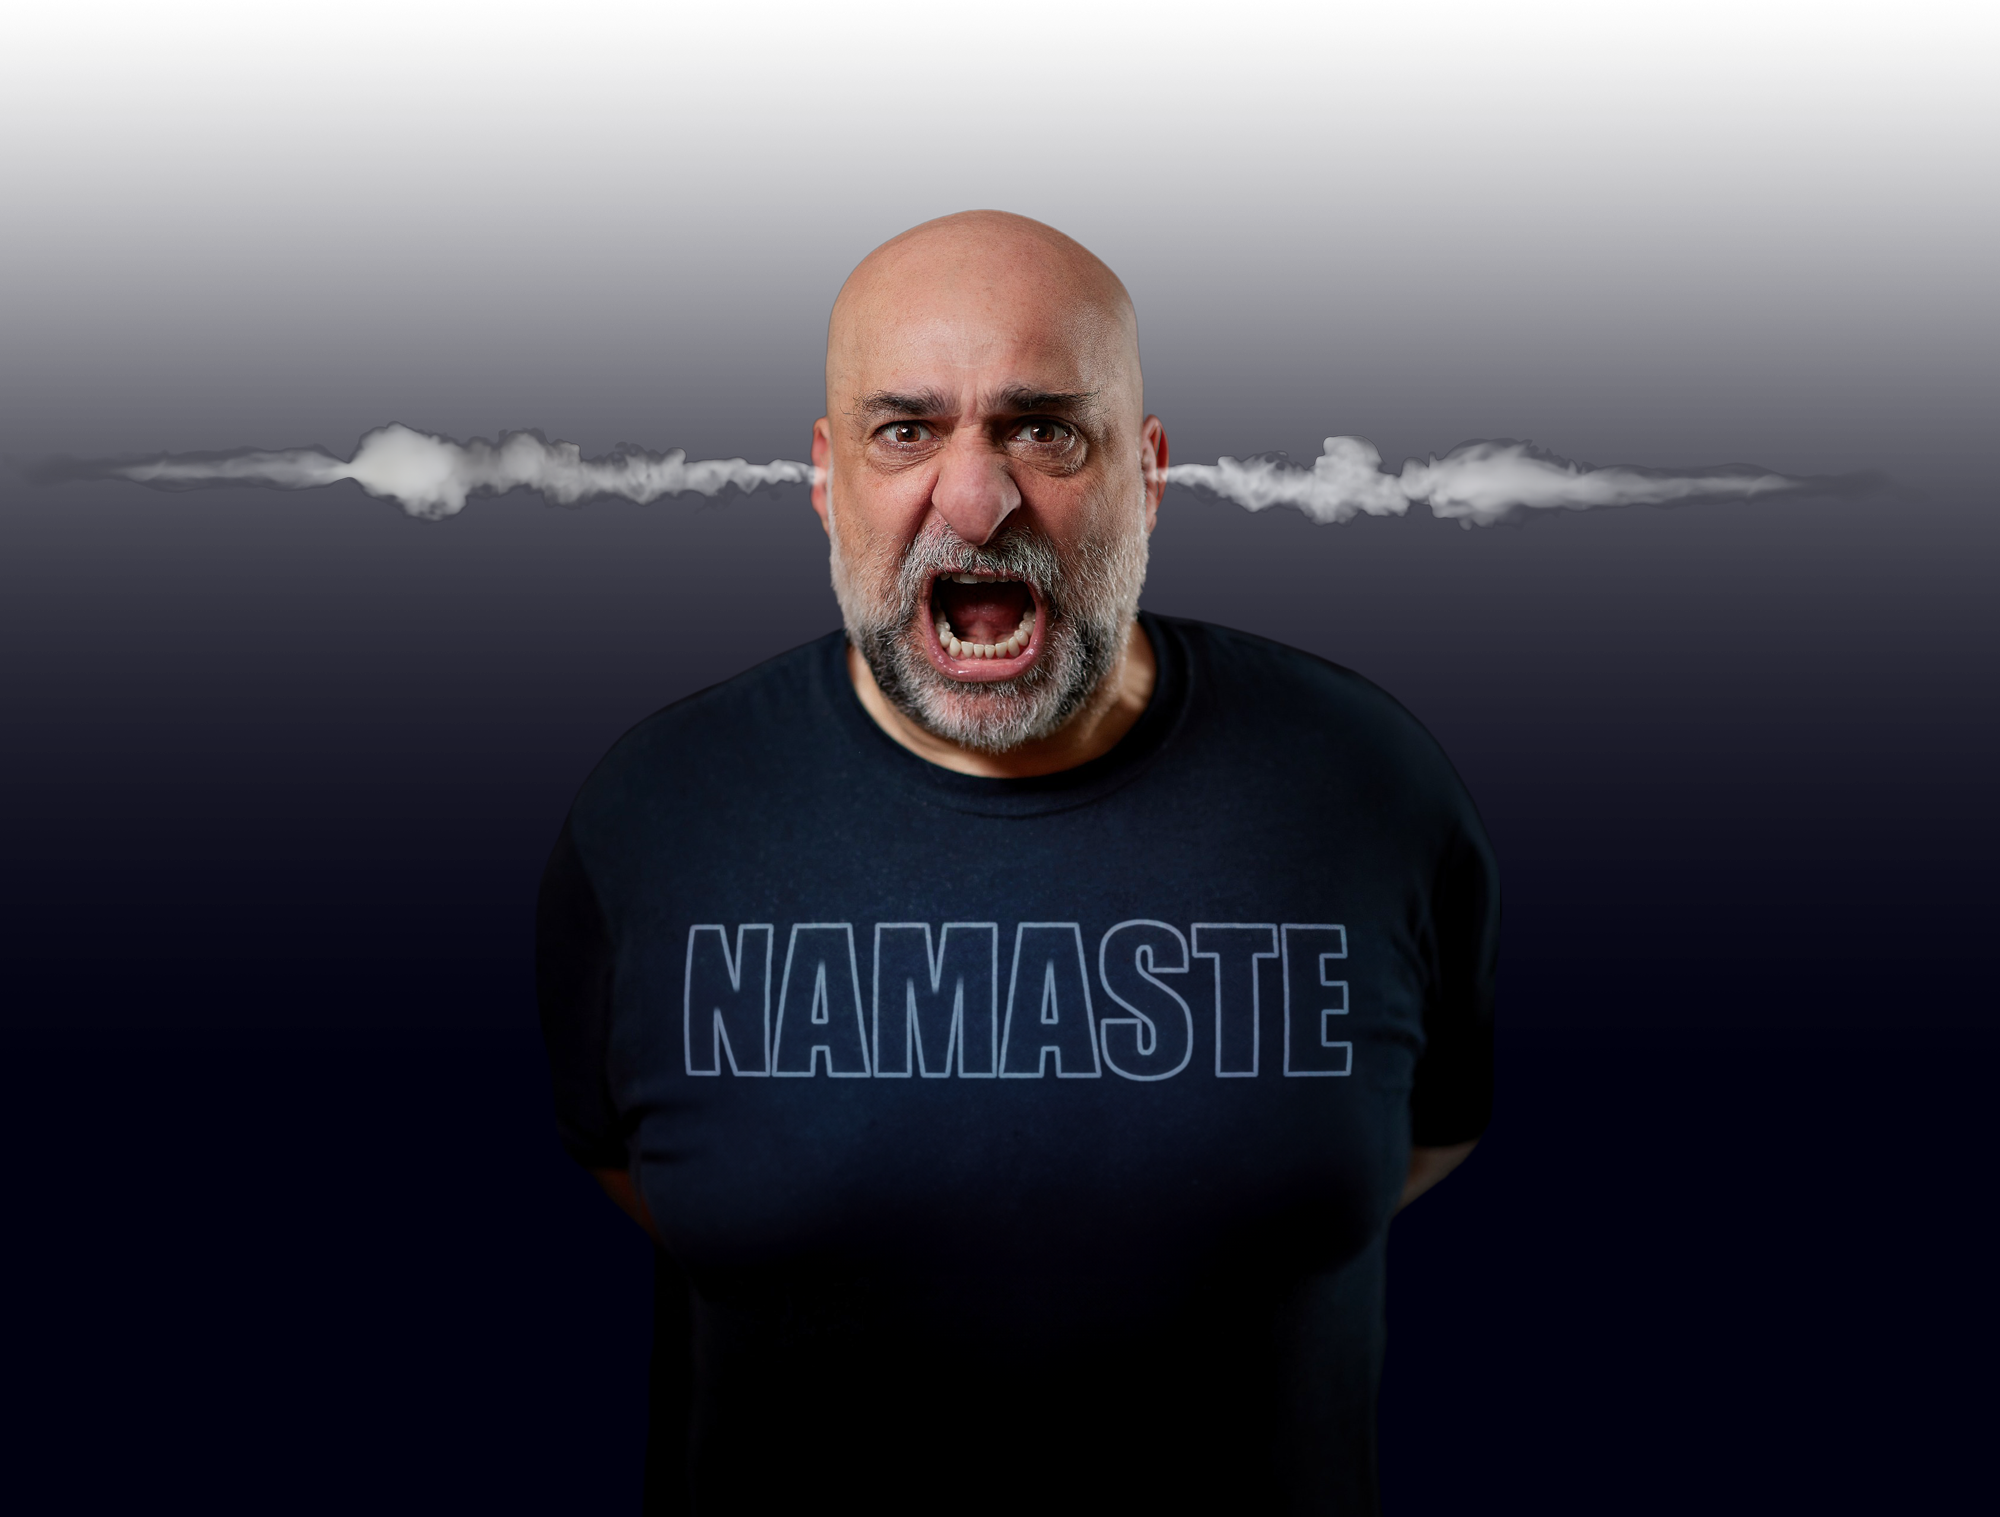 Comedian, actor Omid Djalili brings his Namaste Live tour to Montreal